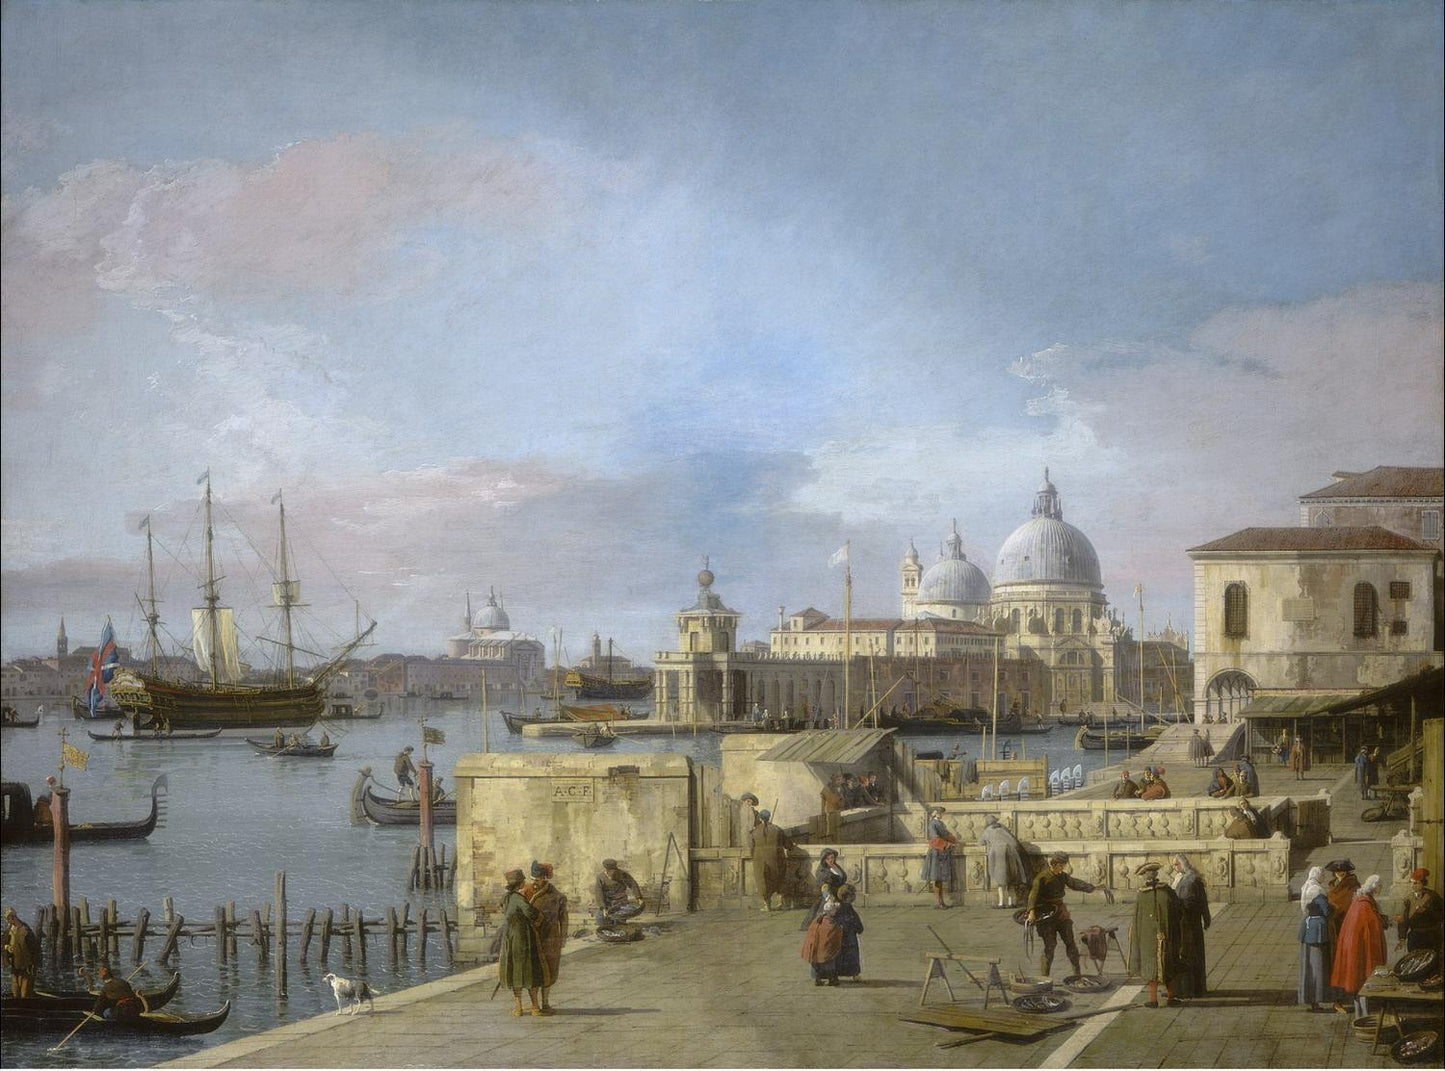 Entrance to the Grand Canal from the Molo, Venice, Canaletto